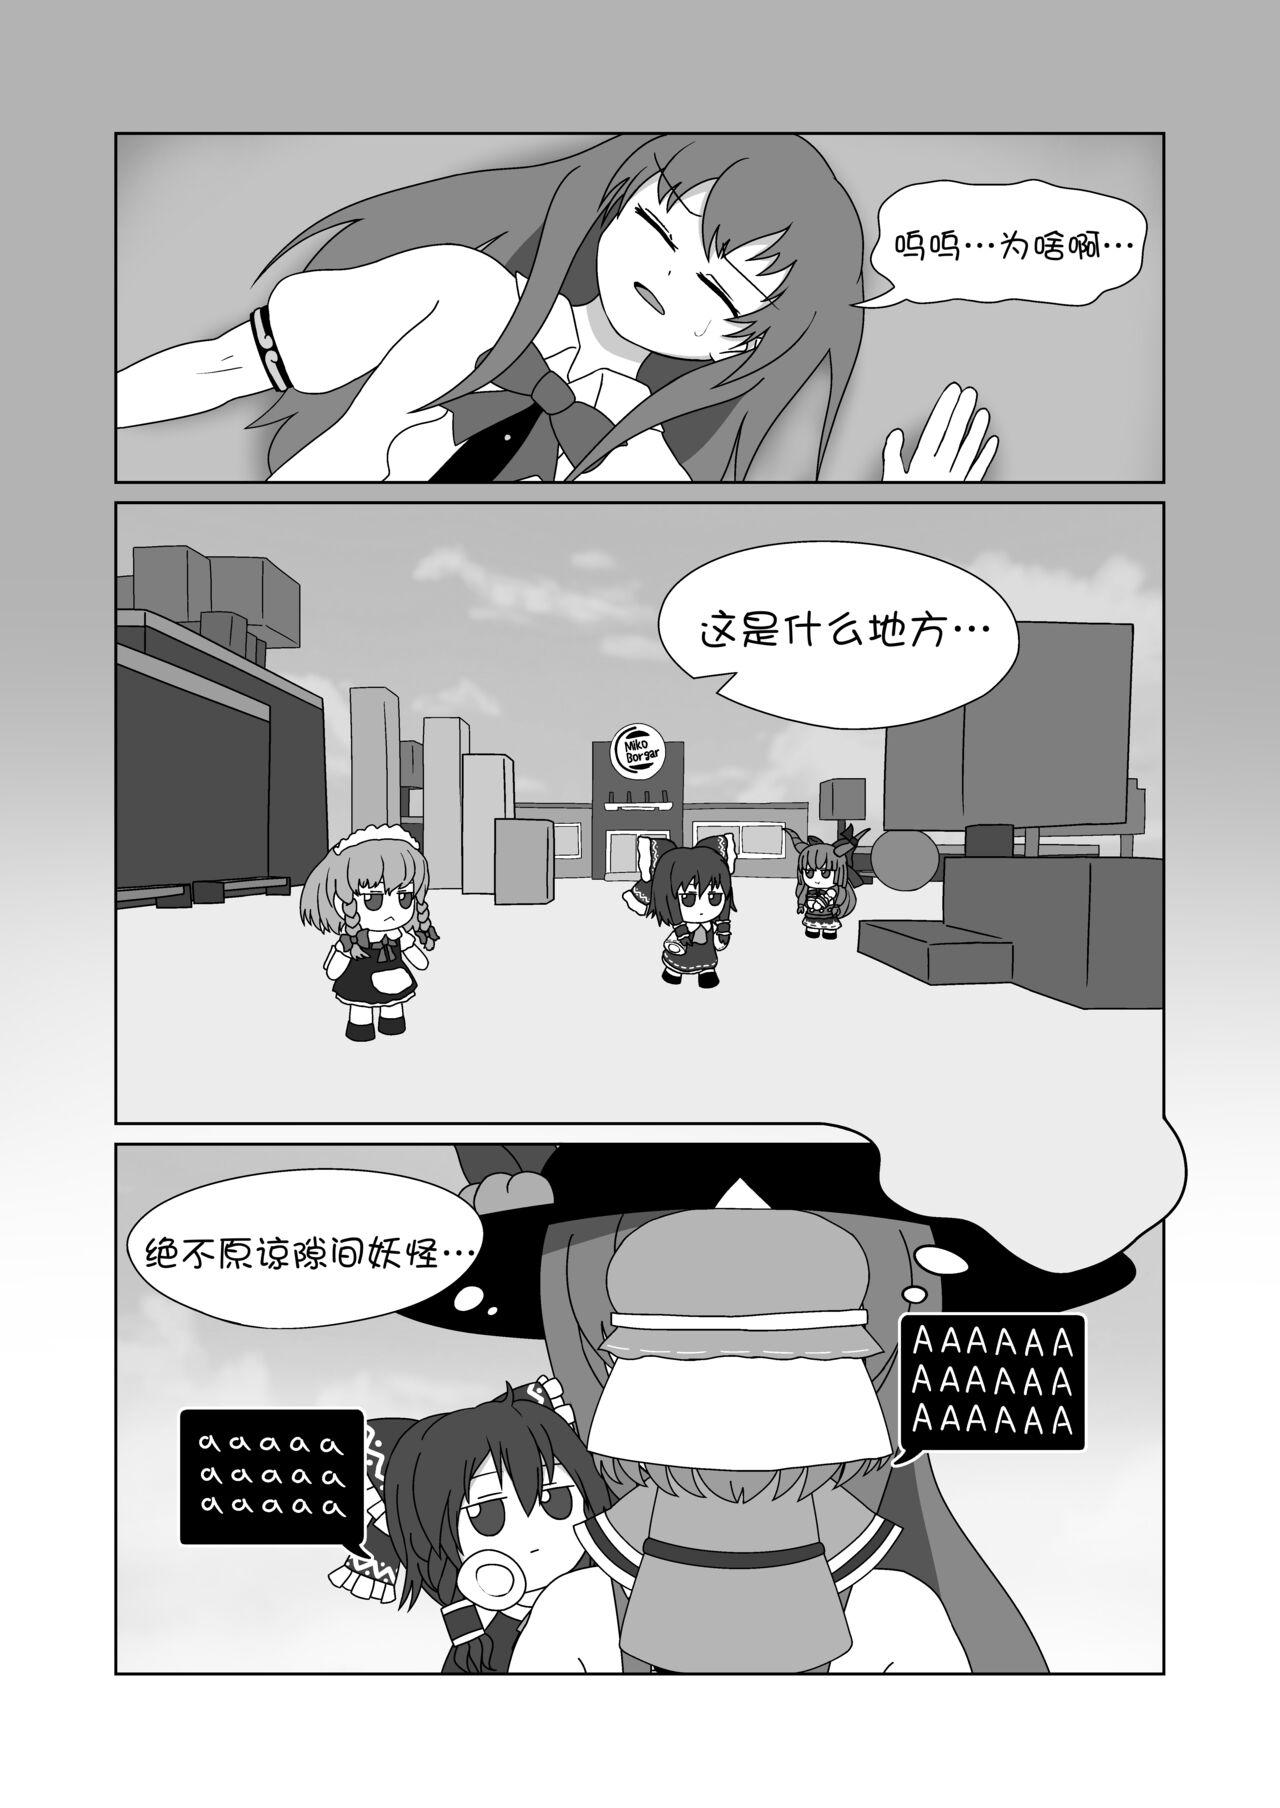 Amature Allure 天子 in BecomeFumo - Touhou project Hot Mom - Page 5